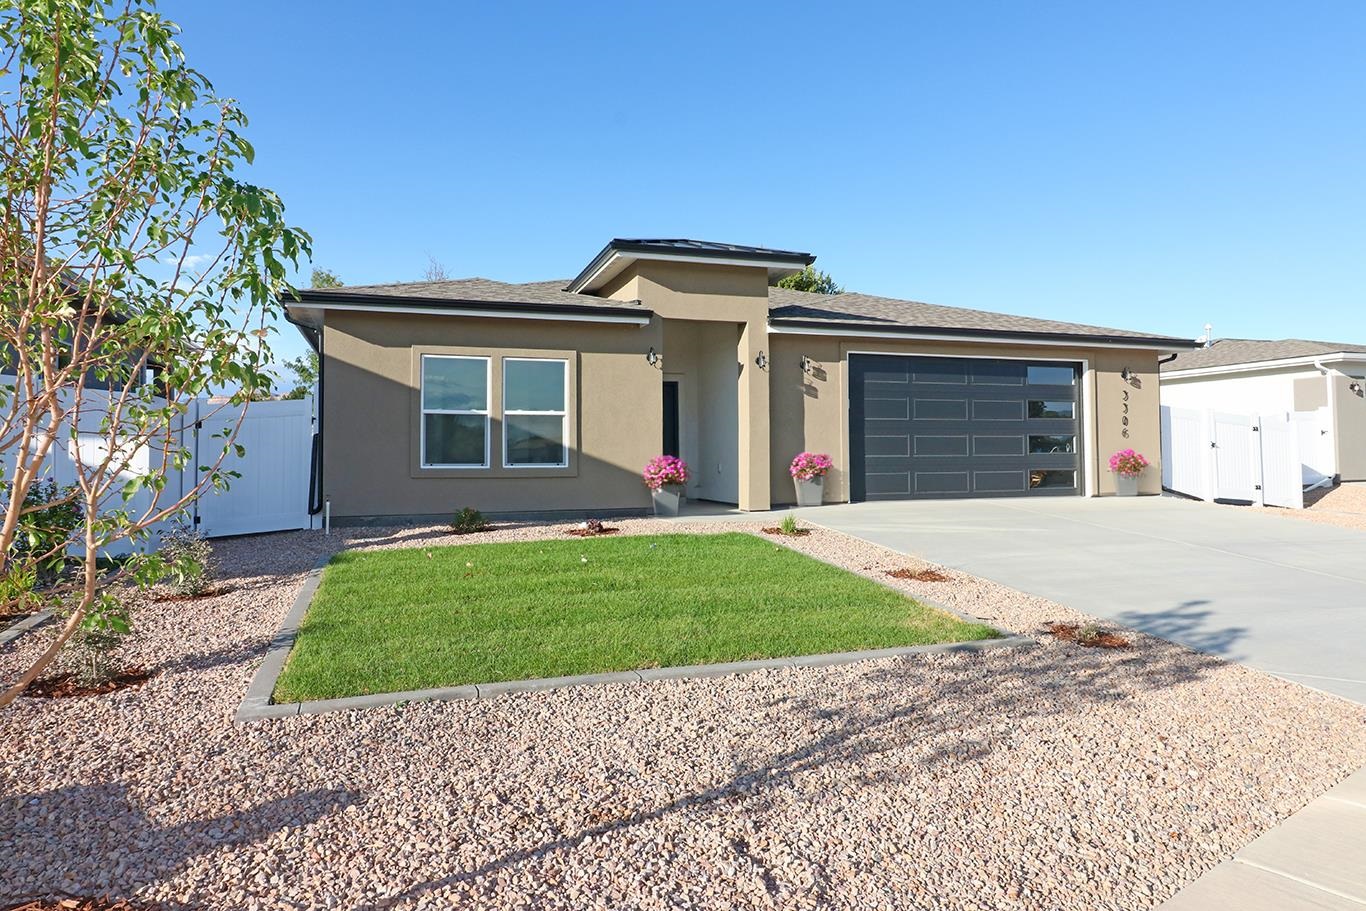 Use Our Builder Advantage program can help you get 1% in closing costs through sellers preferred lender. OR CRA FINANCING TO POTENTIALLY SAVE HUNDRDS OF $$/ MO ON PAYMENTS (CALL FOR DETAILS). PICK LOT & FLOORPLAN OR GO CUSTOM IN VISTA MESA!! AMAZING Grand Mesa views from this new neighborhood just south east of 33 & E Roads! 3/4 Mile to the Riverfront Trail & 1/2 mile to the new Mesa Co Community Campus with library, early childhood ed center & more . INCLUDES LANDSCAPING & FENCING.. Single level rancher with split floorplan, 1817 square feet, 3 bedrooms, 2 baths, open nice great room area for friends and family gatherings, 2 car oversize garage and RV parking.